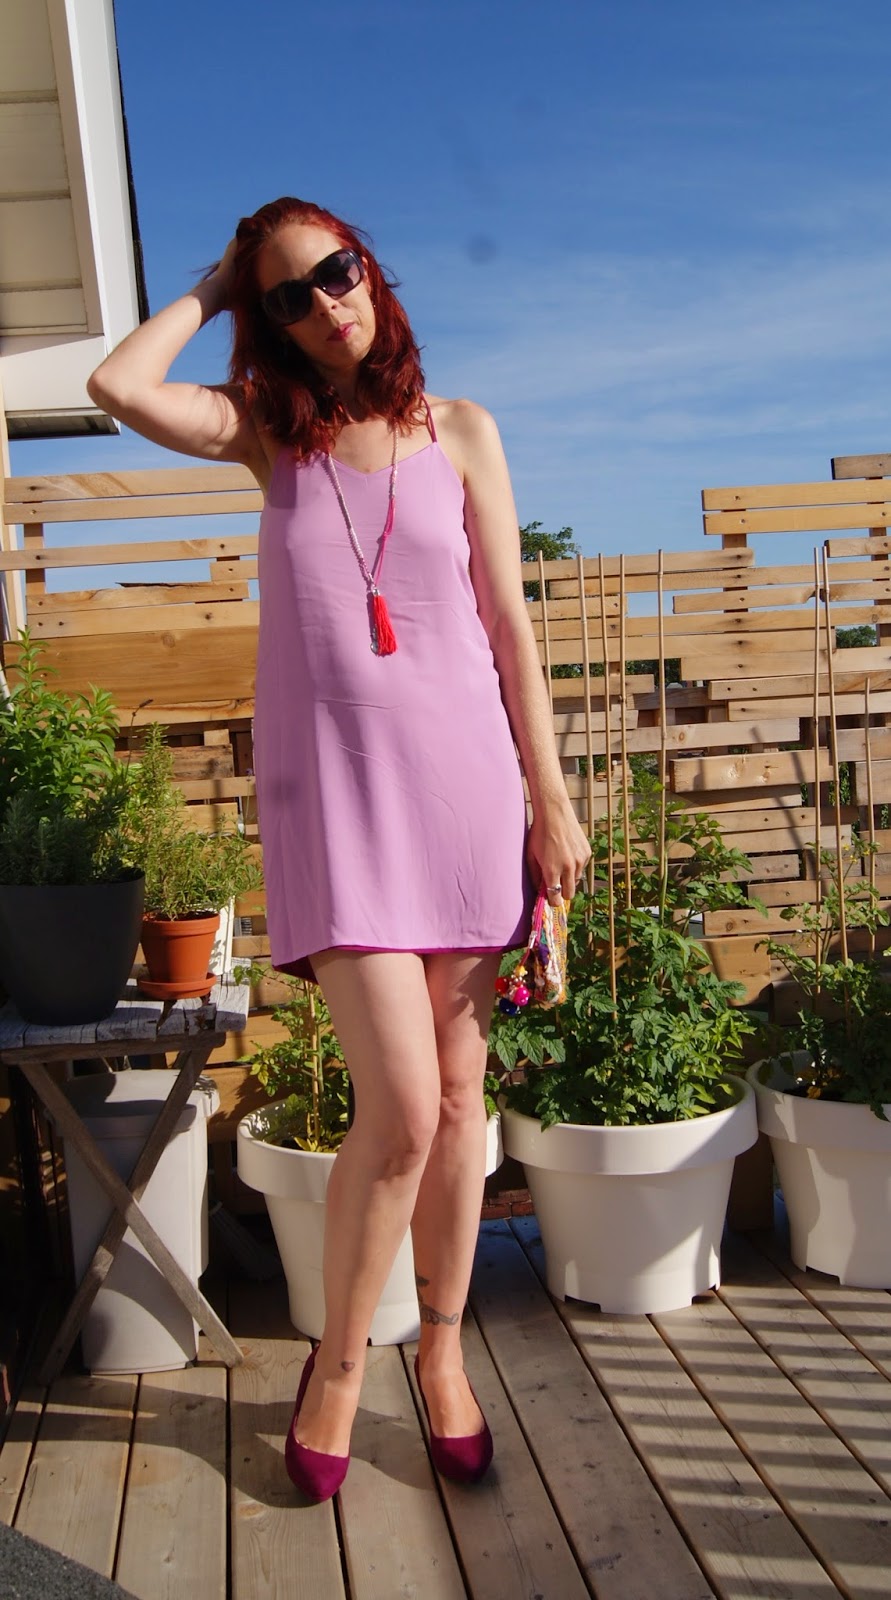 Reversible Cami Dress and necklace from Express, Walmart Shoes, Urban Outfitters Clutch,Fashion, Style, Orchid, Melanie_Ps, The Purple Scarf, Toronto, Outfit, Travel, Cami, accessories, Heels